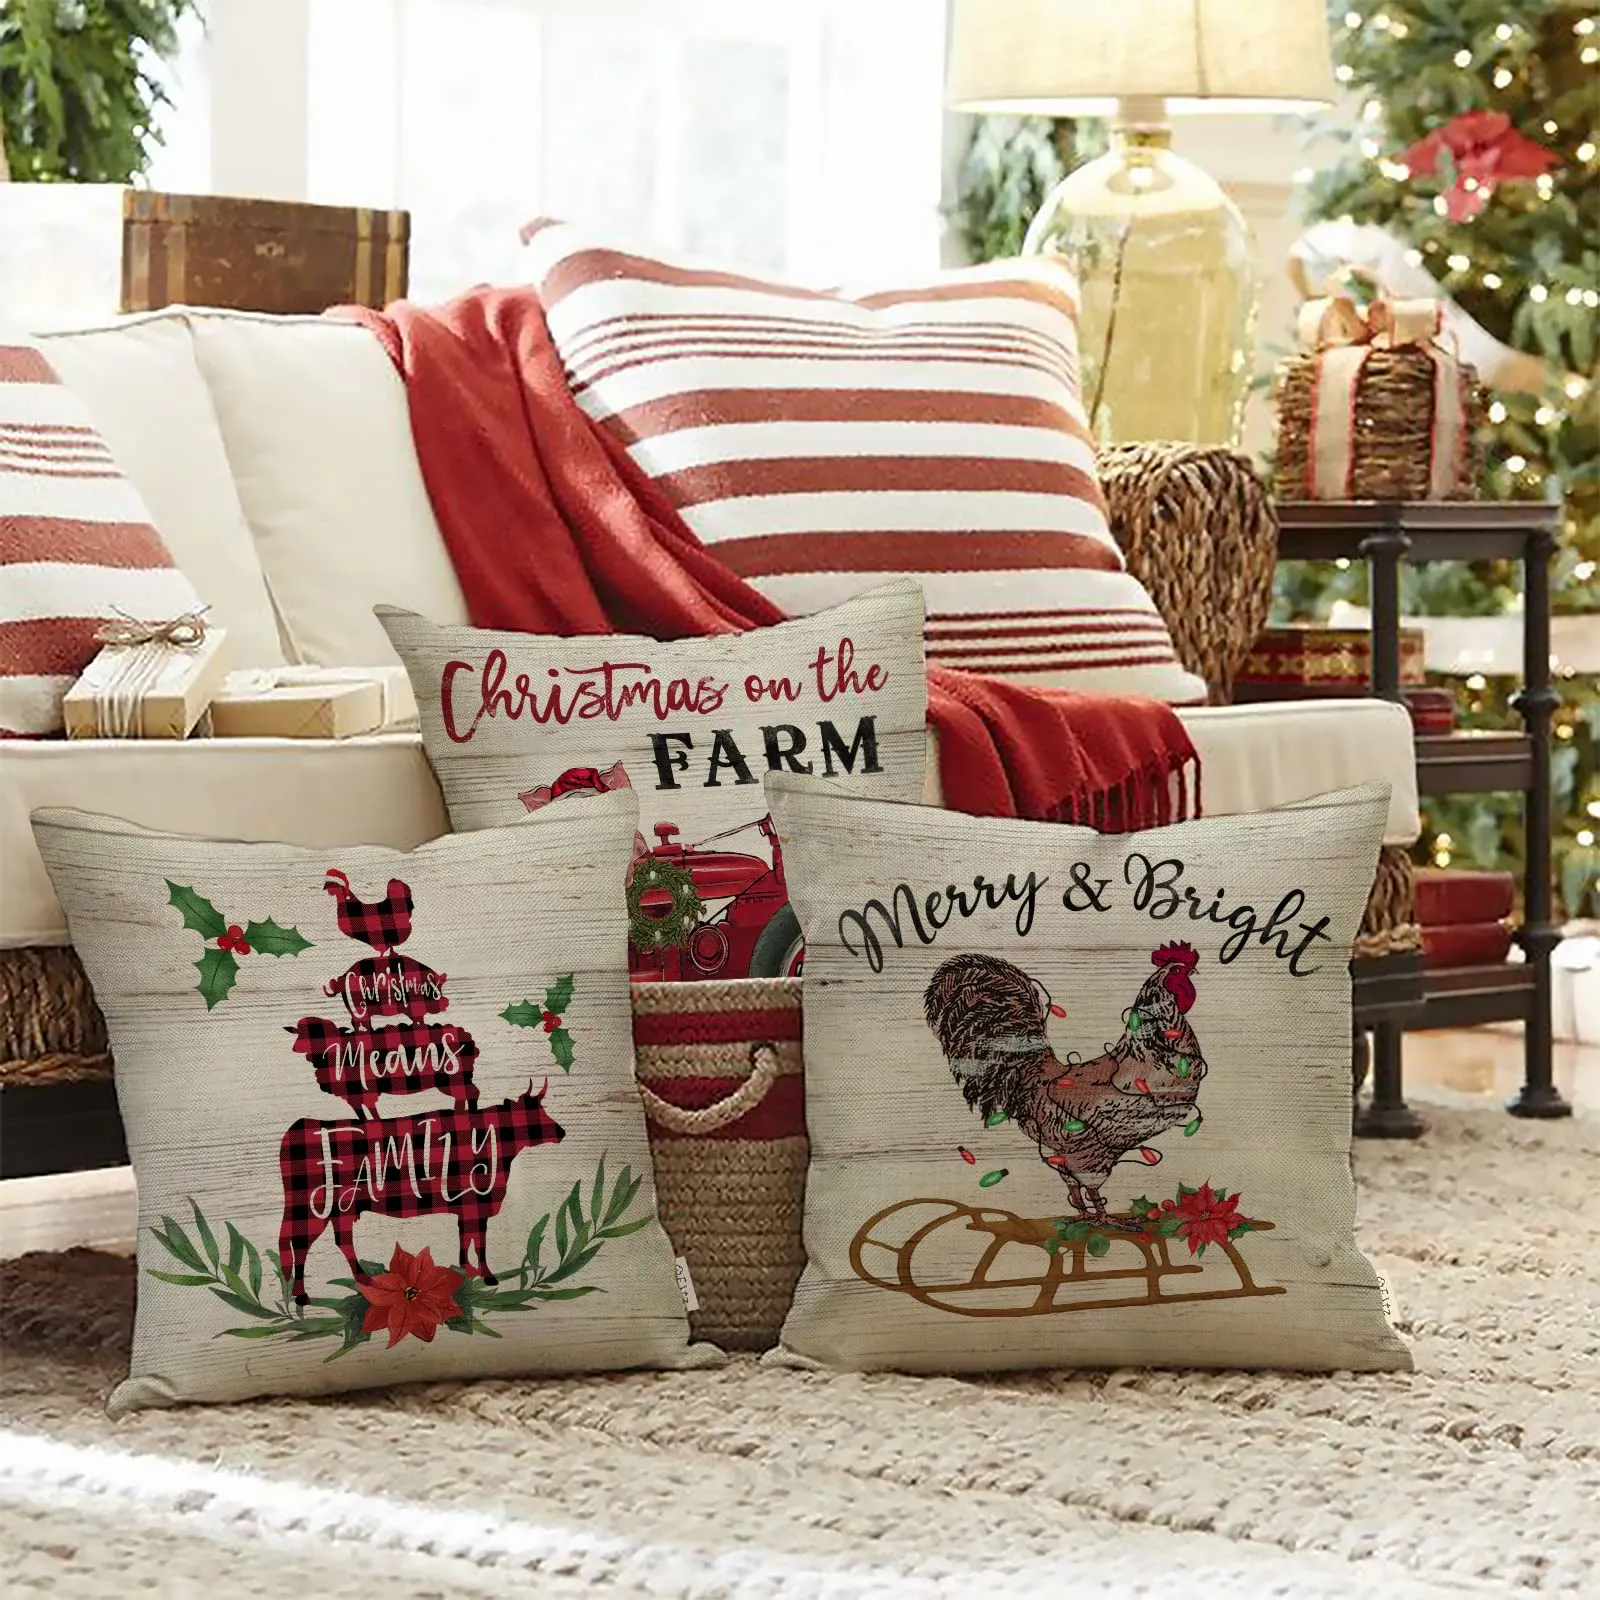 christmas farm farmhouse decorative throw pillow cover set of 4, xmas tree animals merry bright red tractor porch patio home decor, winter holiday rooster  plaid couch cushion case 18 x 18